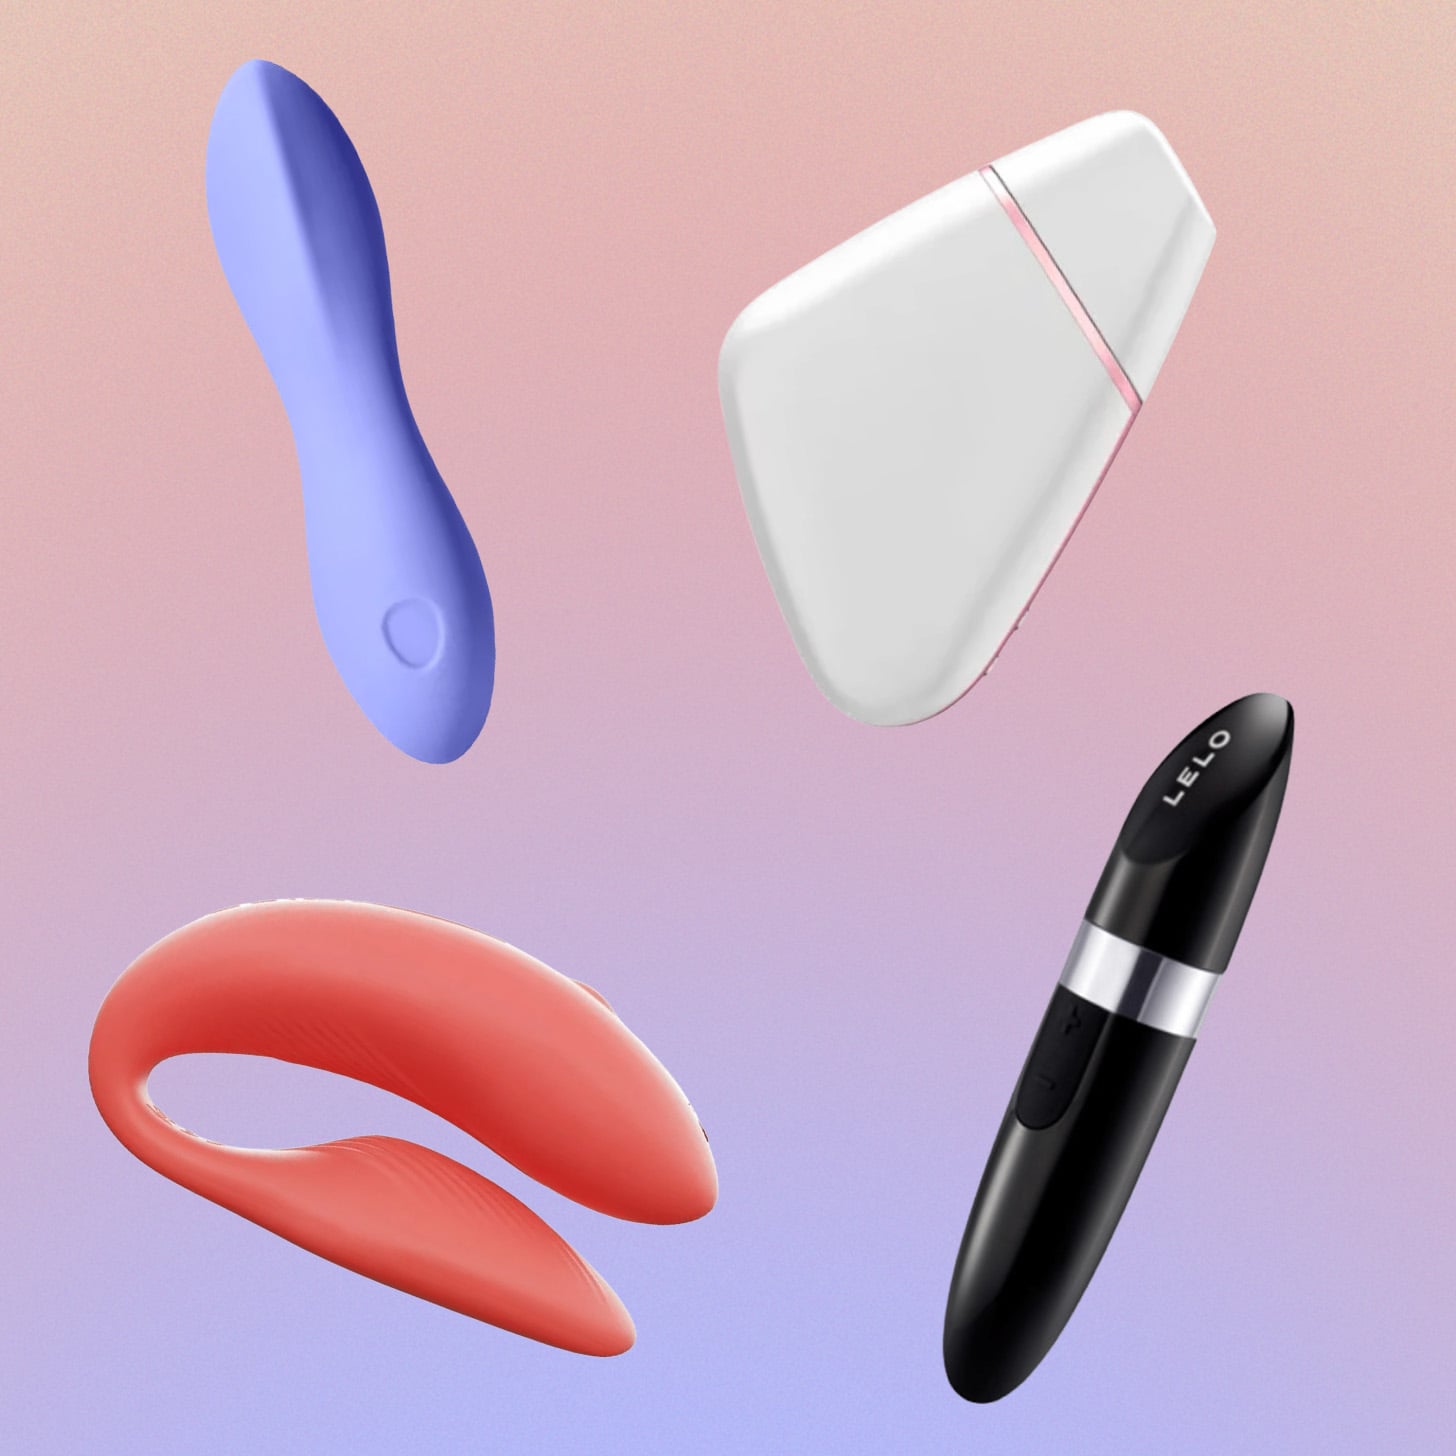 MysteryVibe's Spring Sale 2022 Features Its Best-Selling Sex Toys for Up to  20% Off